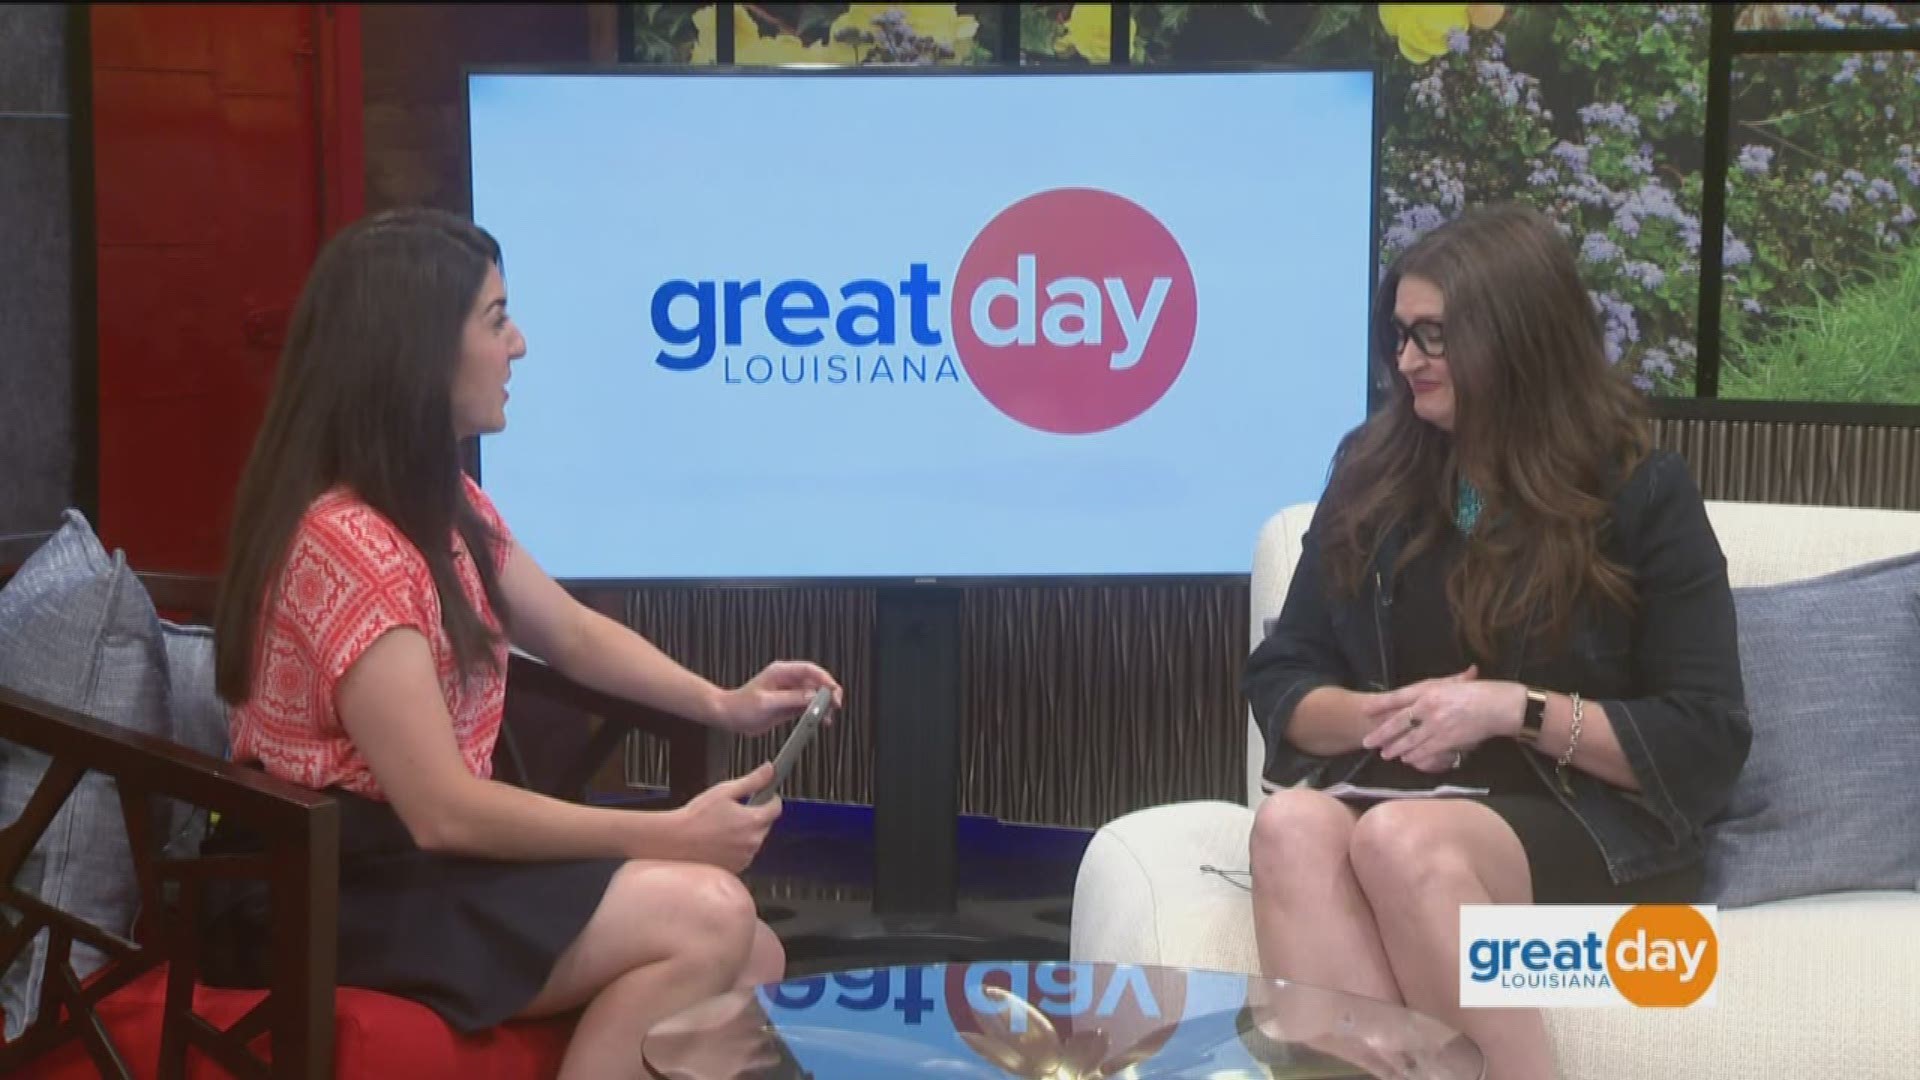 Melanie Warner Spencer with New Orleans Bride Magazine joins us to talk about the latest trends in bridal gowns.